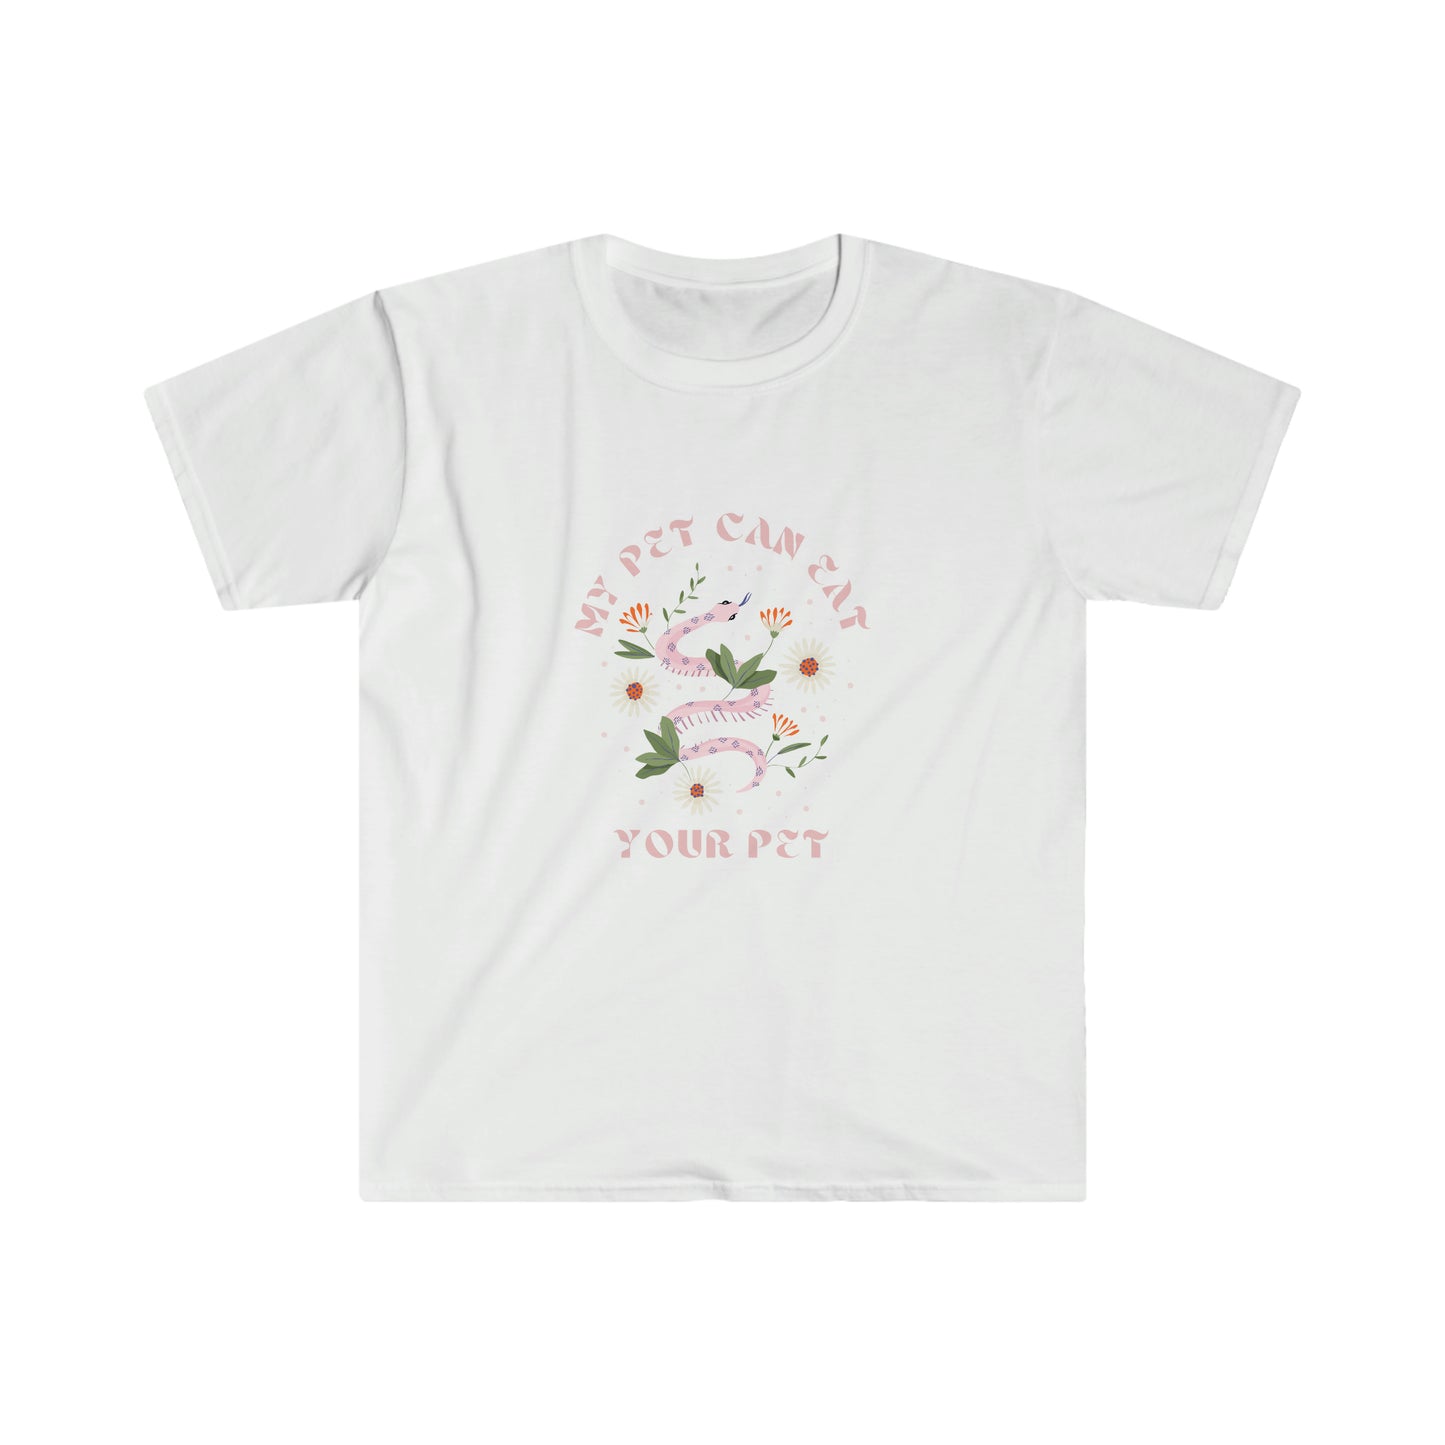 ‘My pet can EAT your pet’ Printed Front & Back. Unisex Softstyle T-Shirt